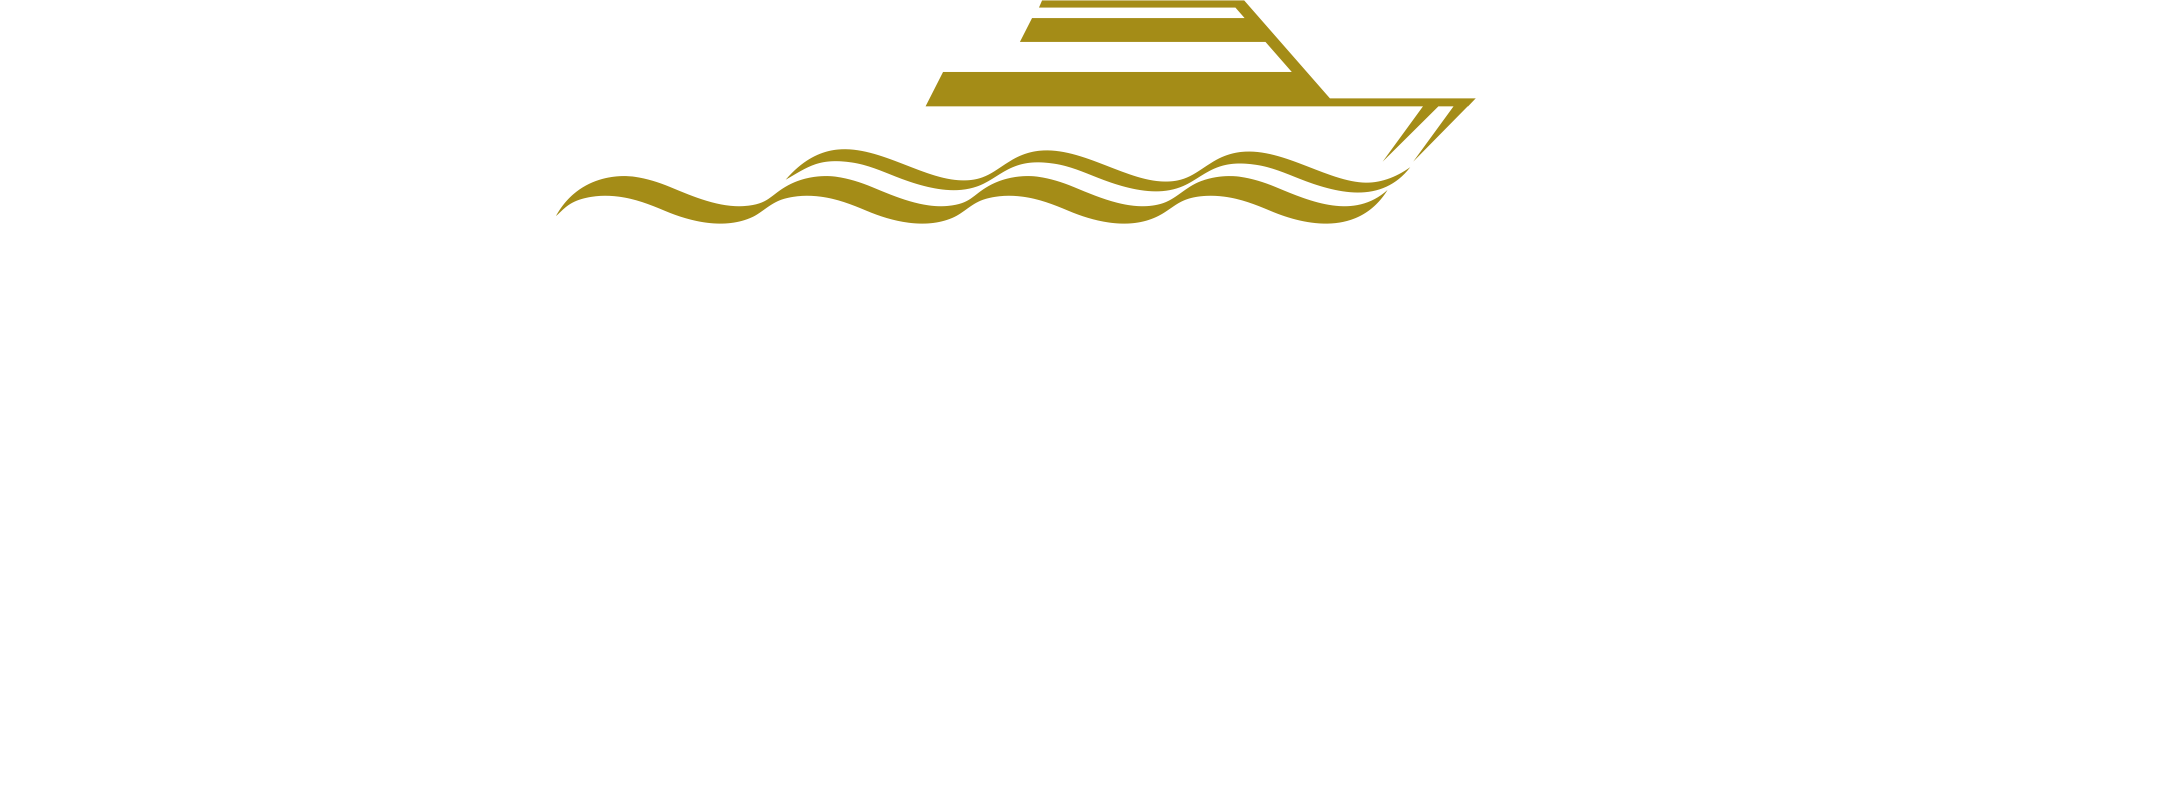 yacht dinner vancouver